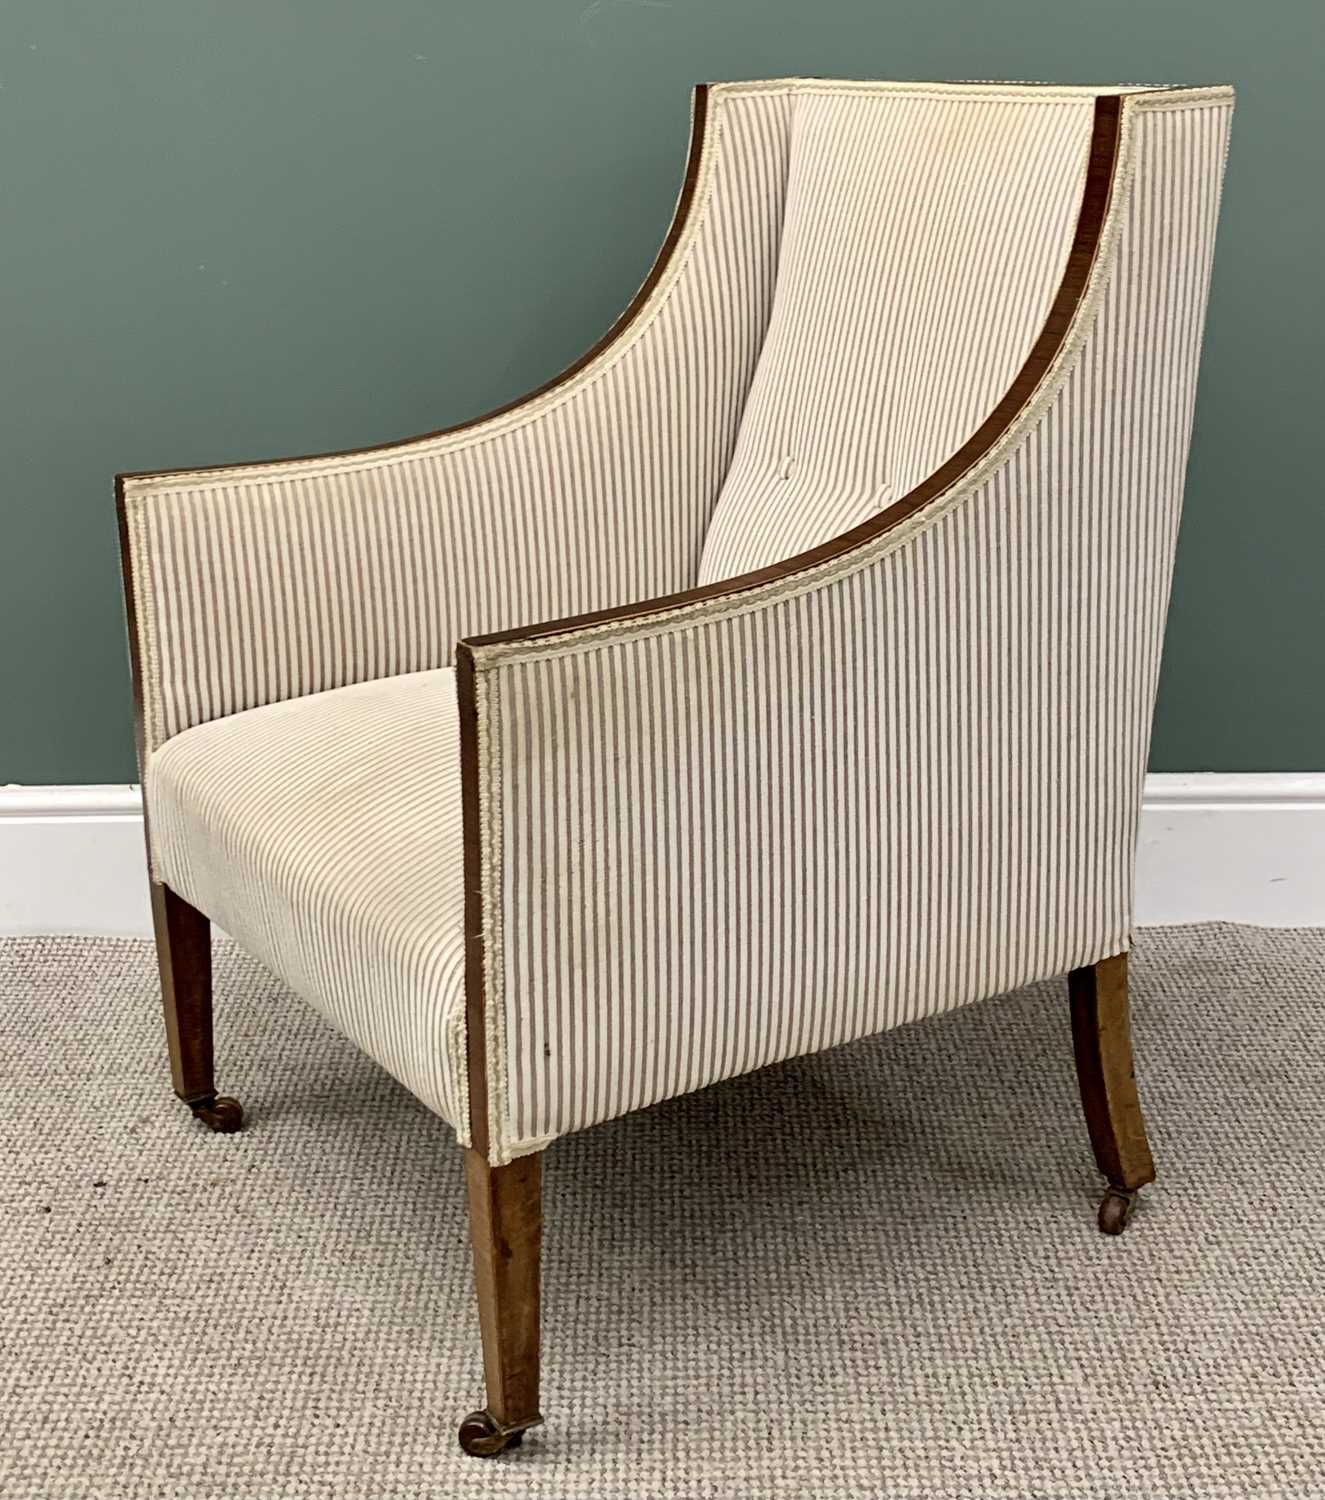 REGENCY-STYLE EDWARDIAN UPHOLSTERED EASY CHAIR in button back striped upholstery, on tapered front - Image 2 of 3